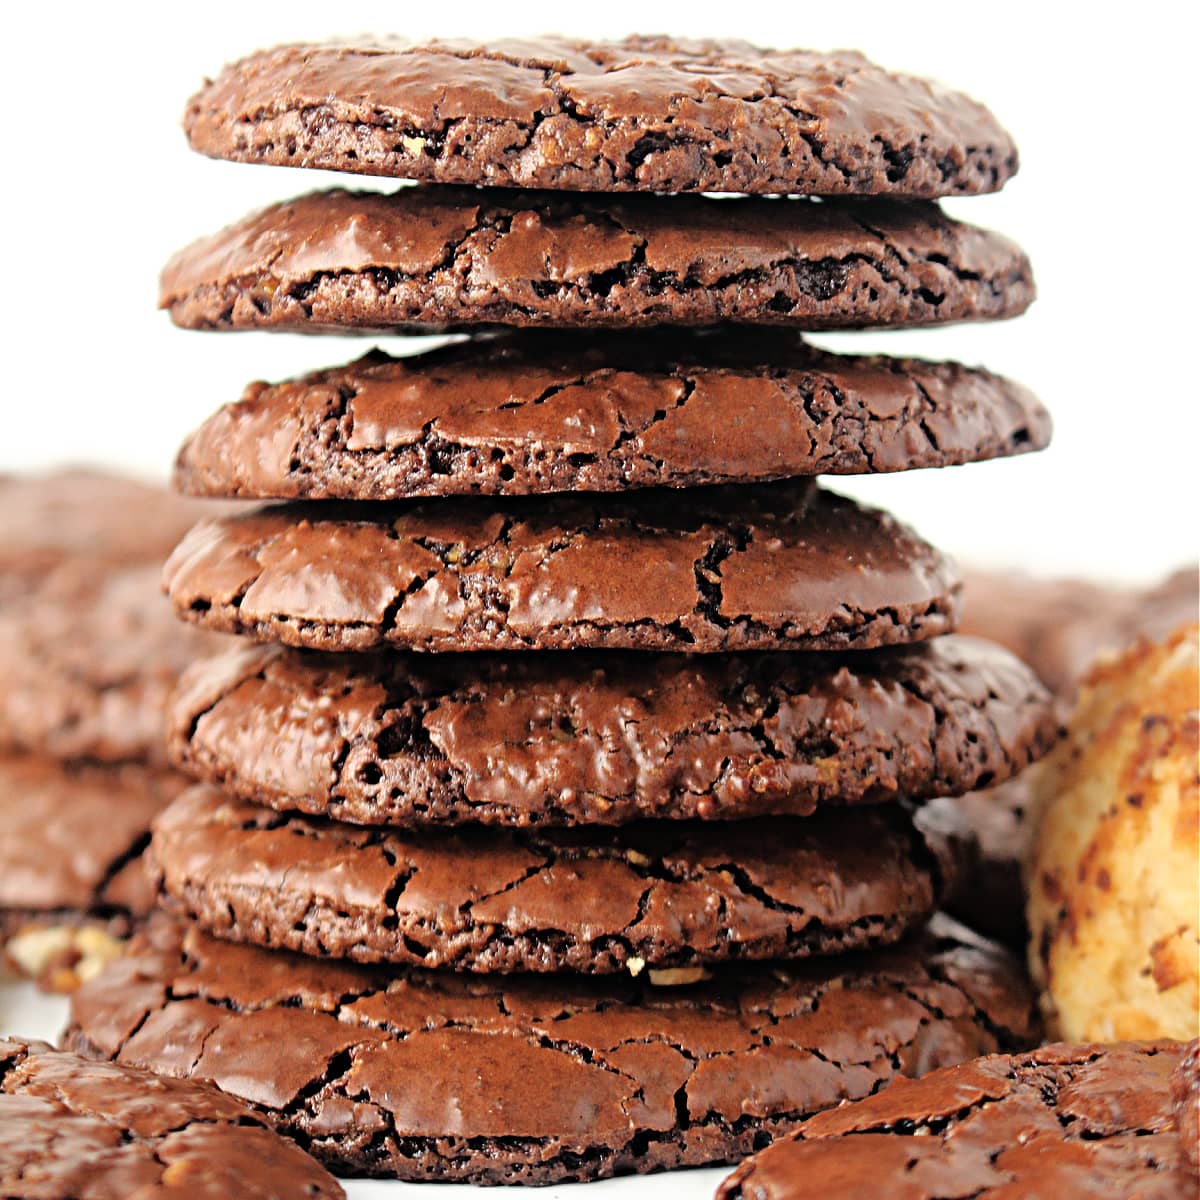 Stack of thin chocolate cookies with shiny crackled tops and crisp edges.